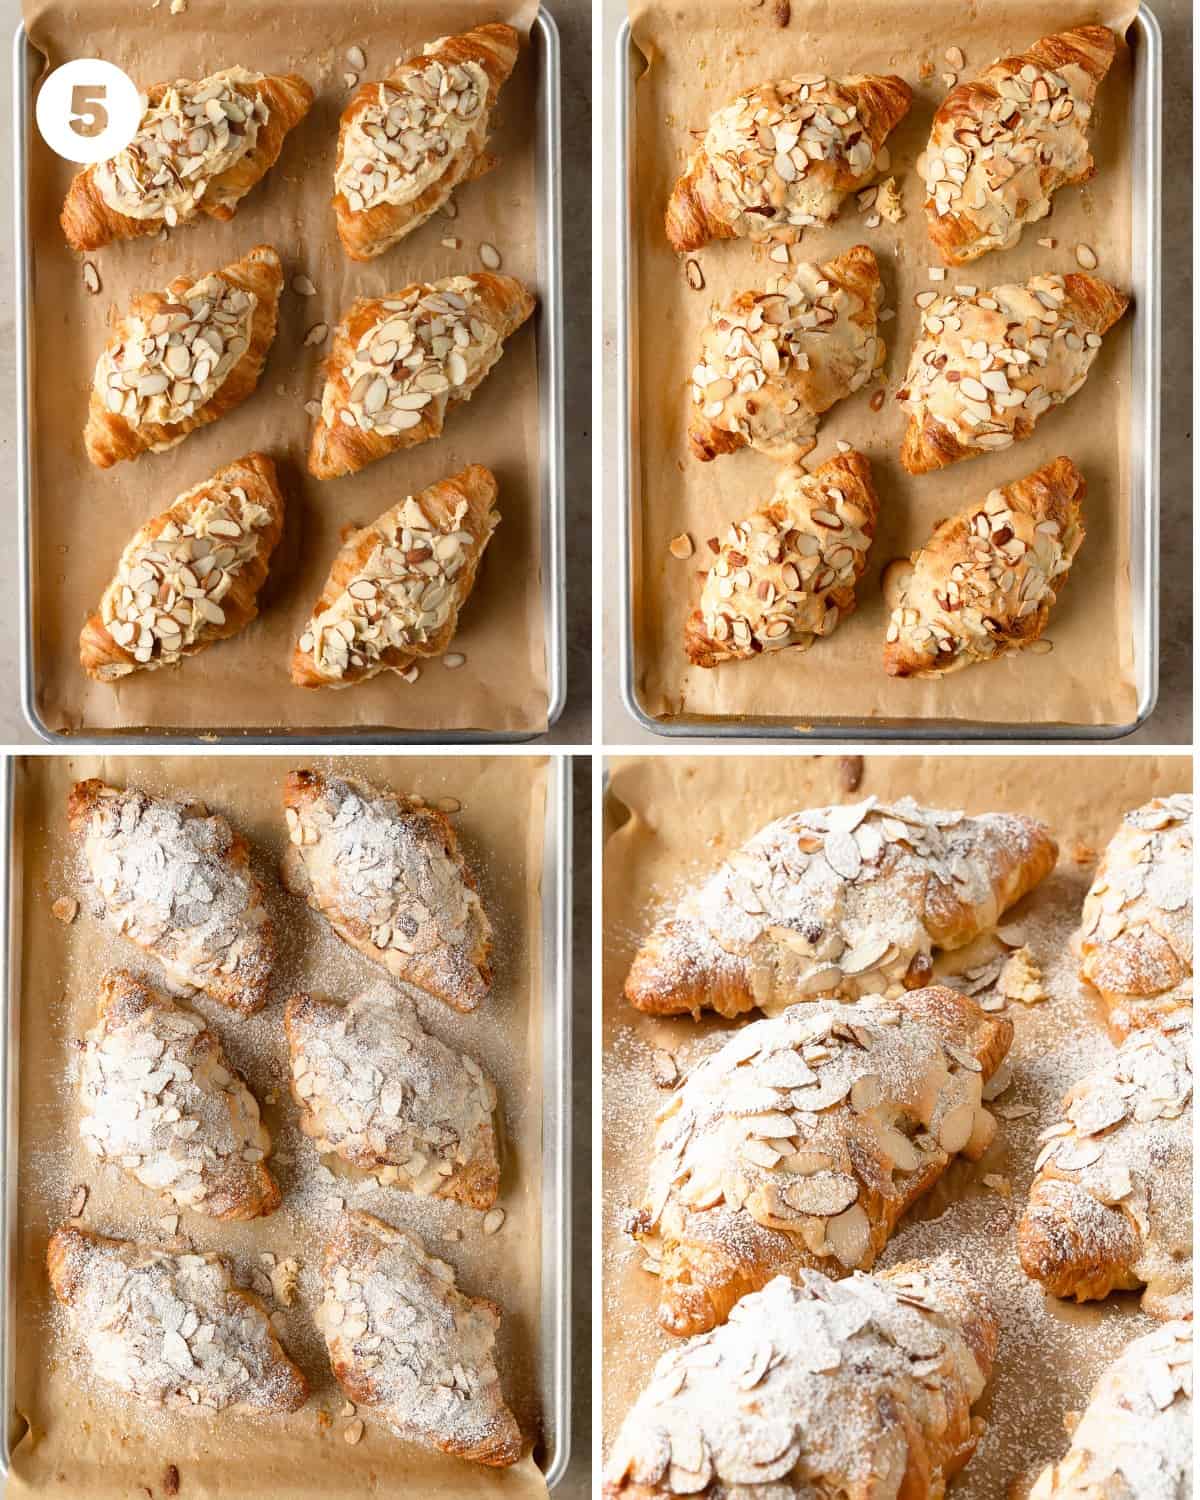 Bake the french bakery style almond croissants for 15 -18 minutes or until the almond filling is set and golden brown. Cool the almond filled croissants on the baking sheet for 3 - 4 minutes. Dust with powdered sugar and serve. 